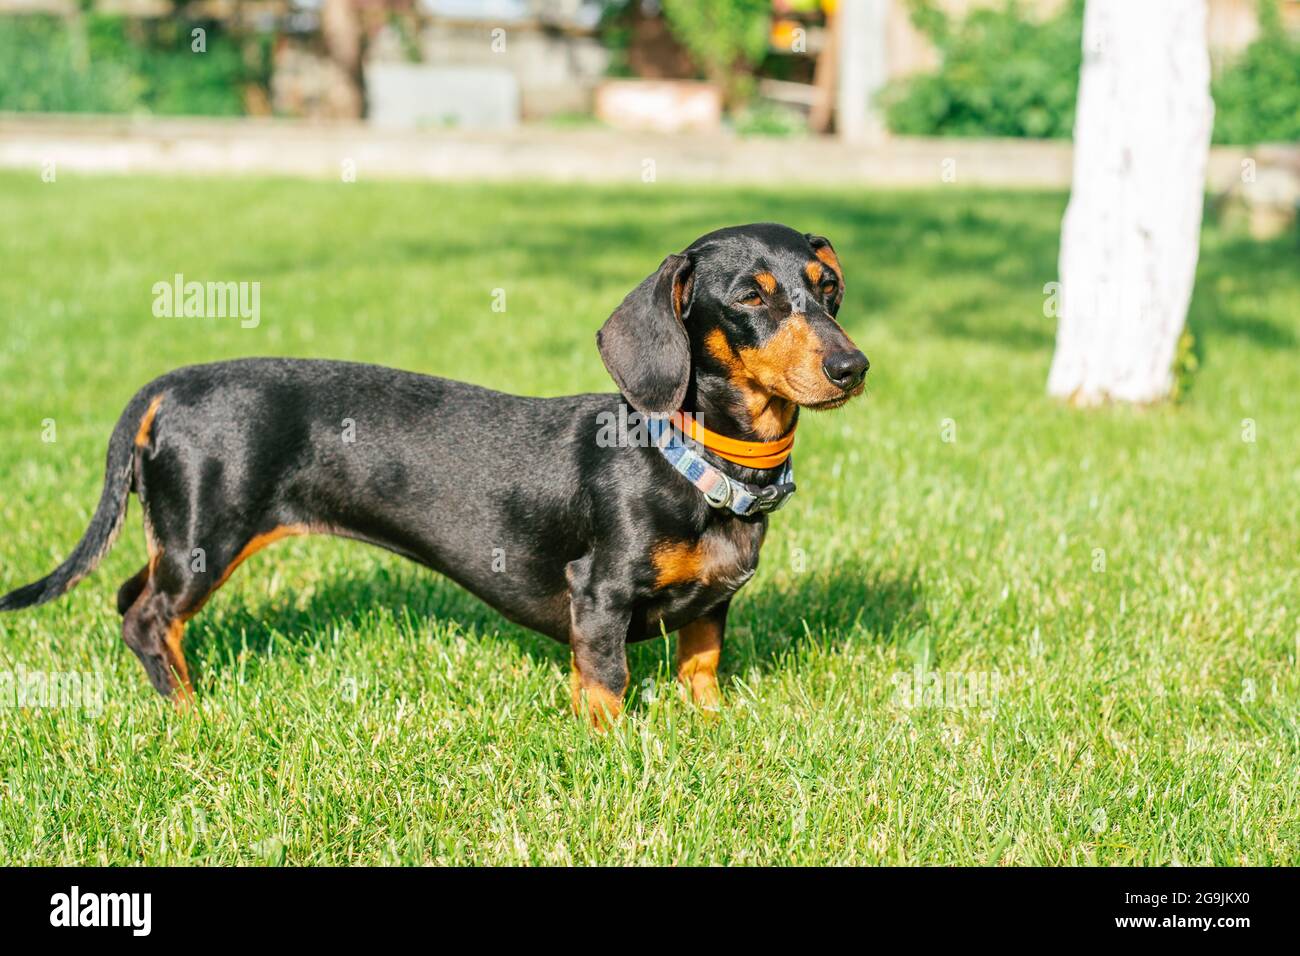 Black and tan dachshund dog in collar stands on green grass Stock Photo -  Alamy